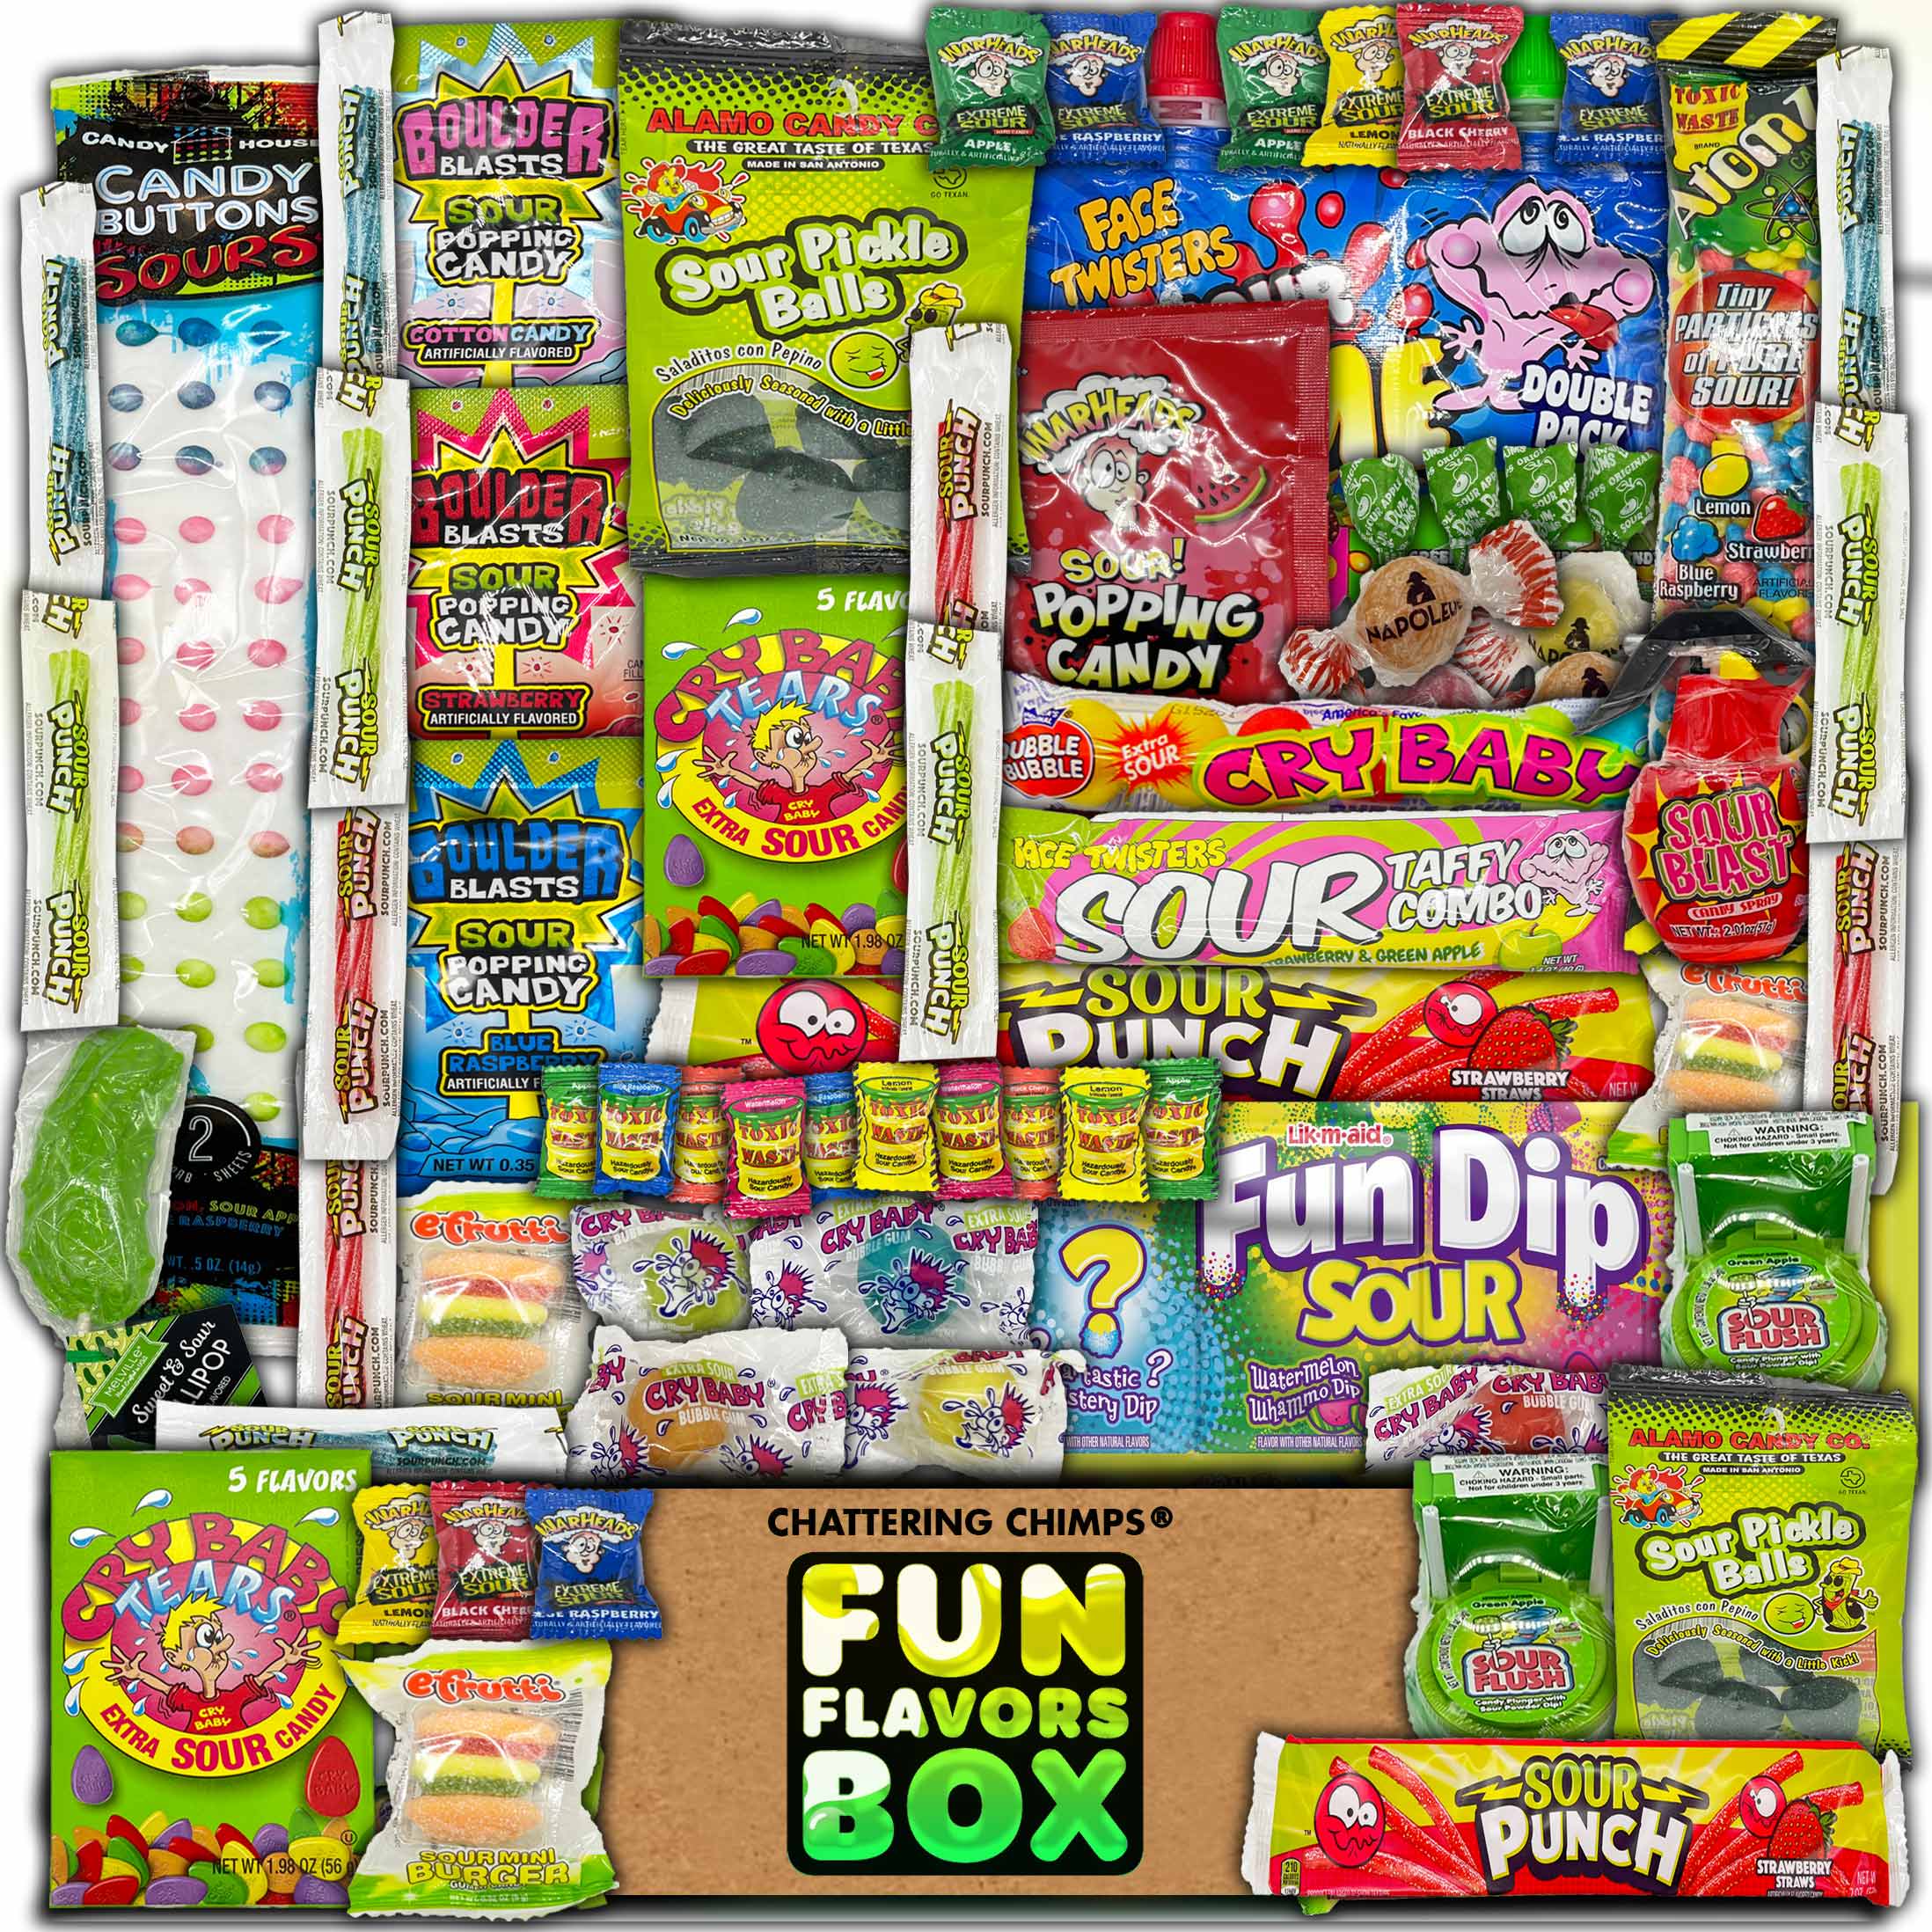 Fun Flavors Box Premium Sweet and Sour Candy Candy Snack Gift Box 30 Count